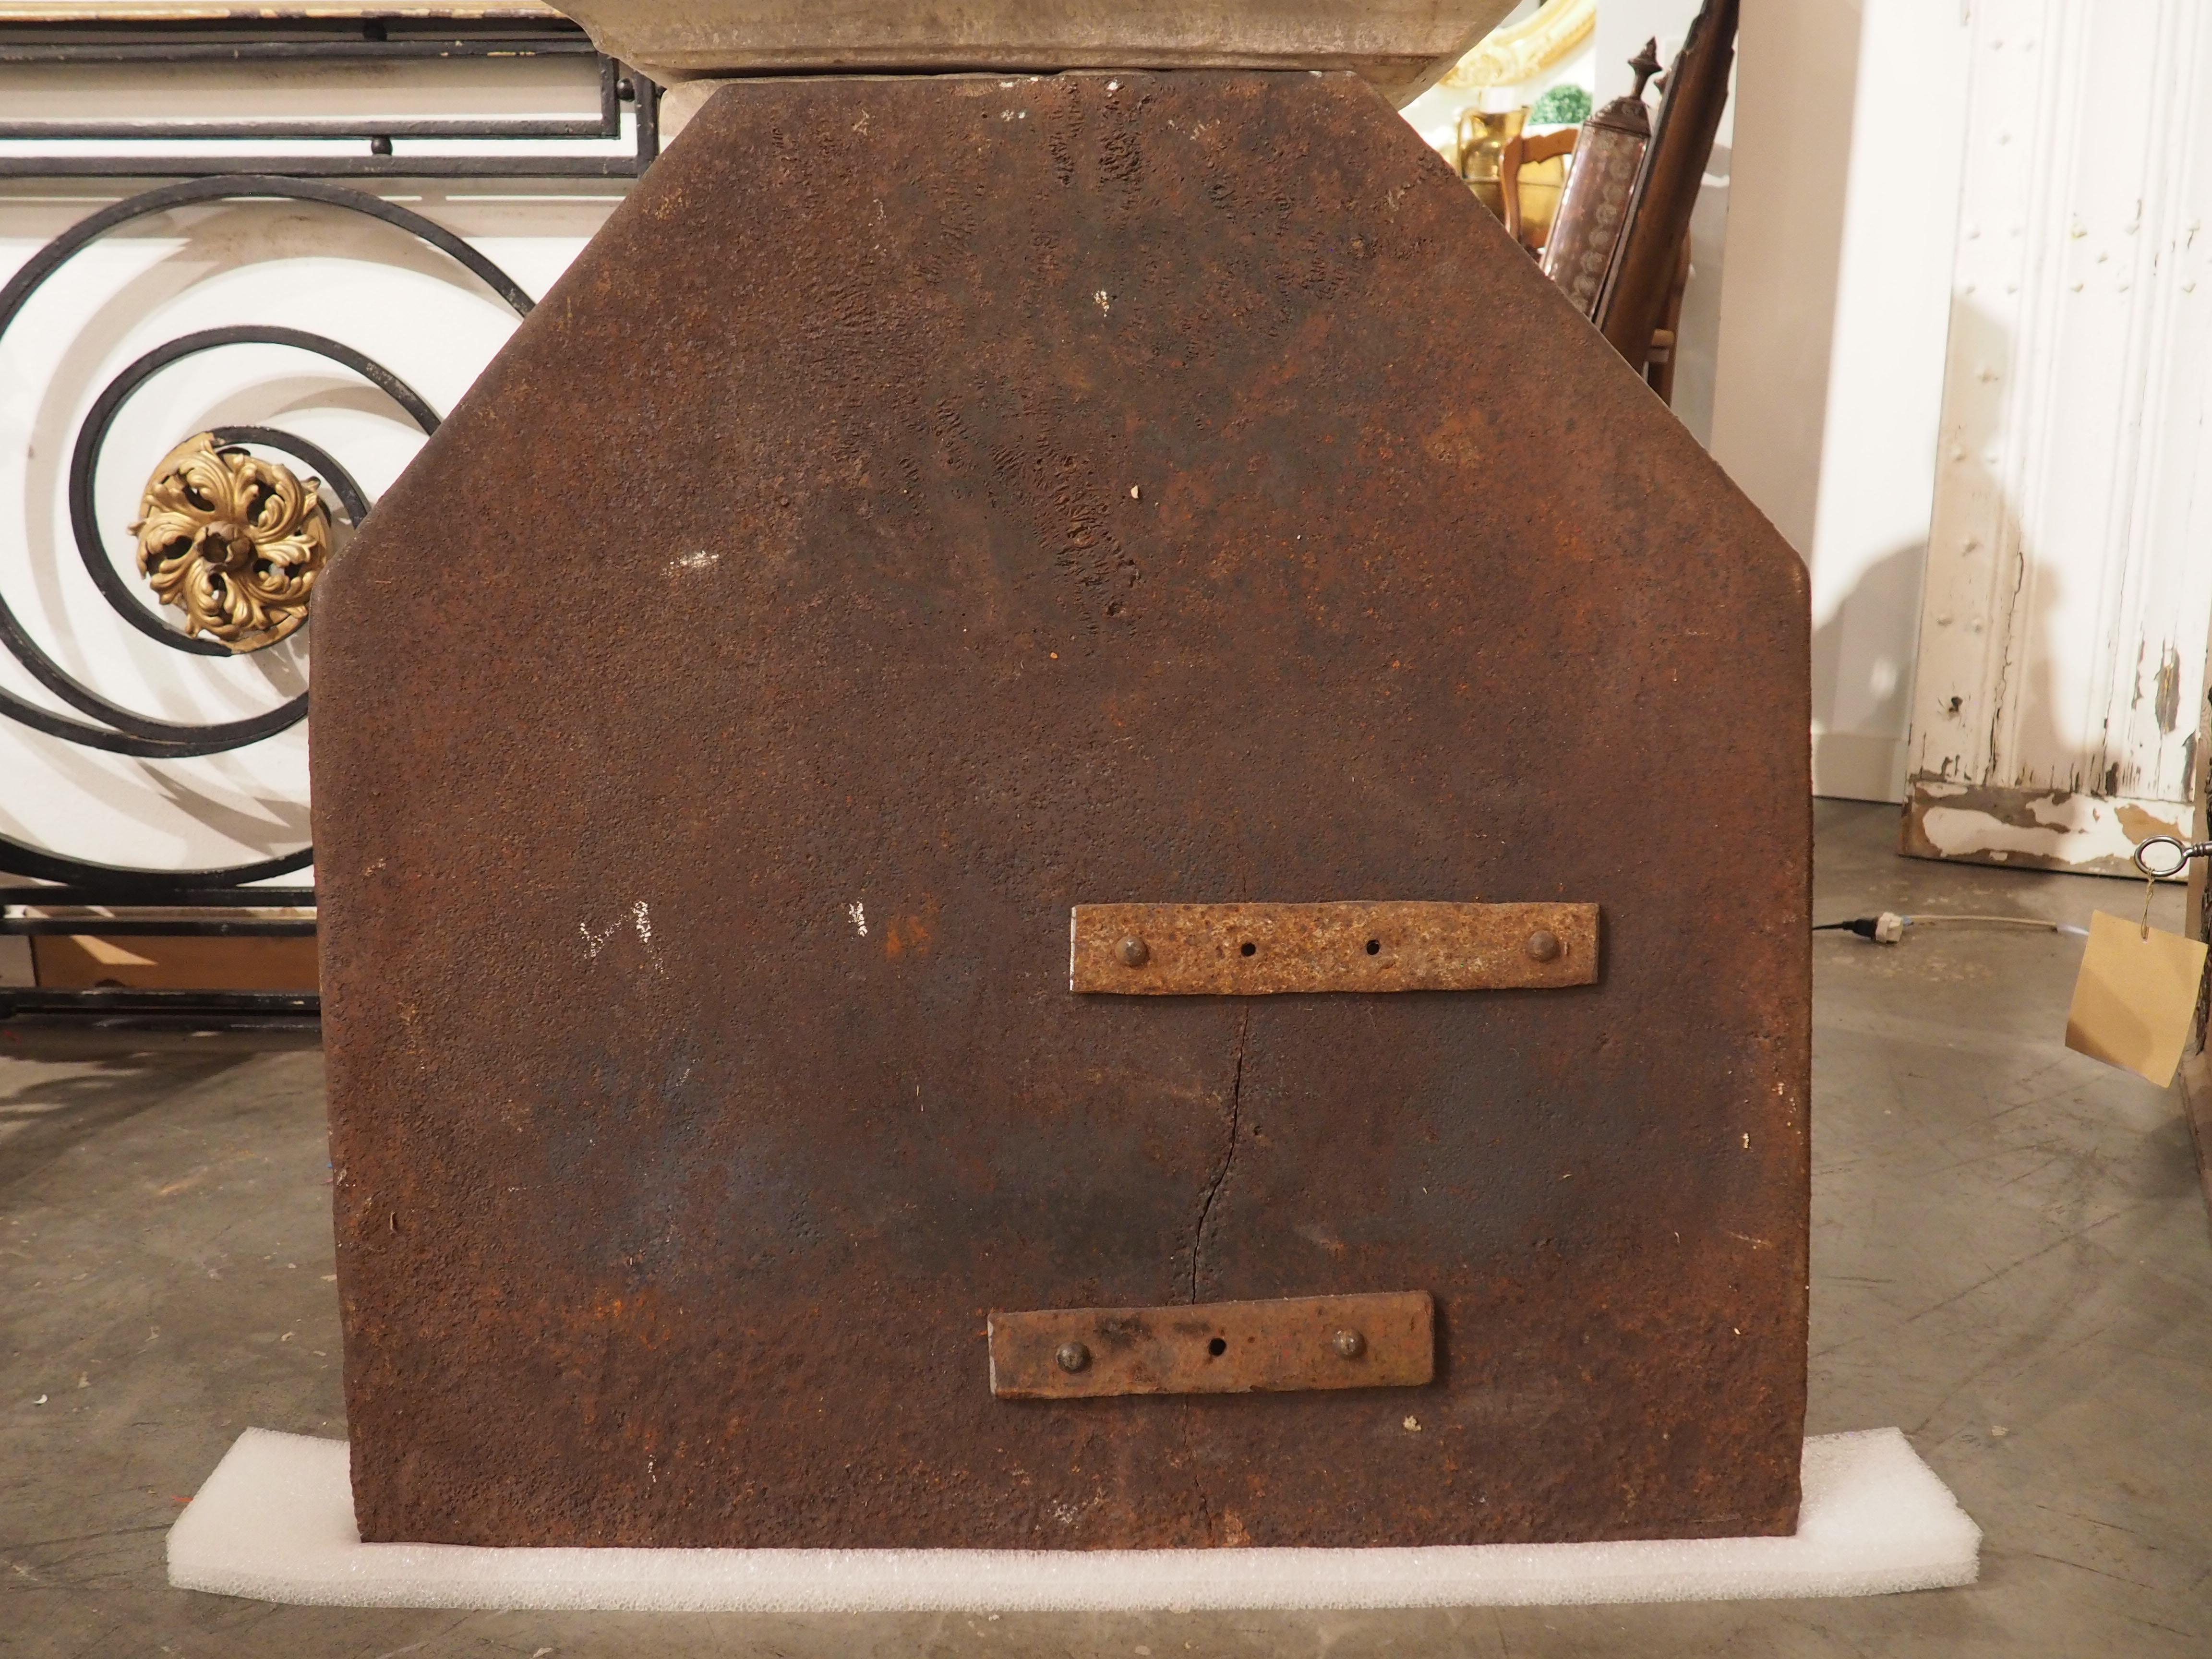 First used about 450-500 years ago to reflect and disperse heat from the fireplace, firebacks are often cast in iron in proportion to the size of the fireplace. Based on its size, this fireback, which is from circa 1600, would have most likely been